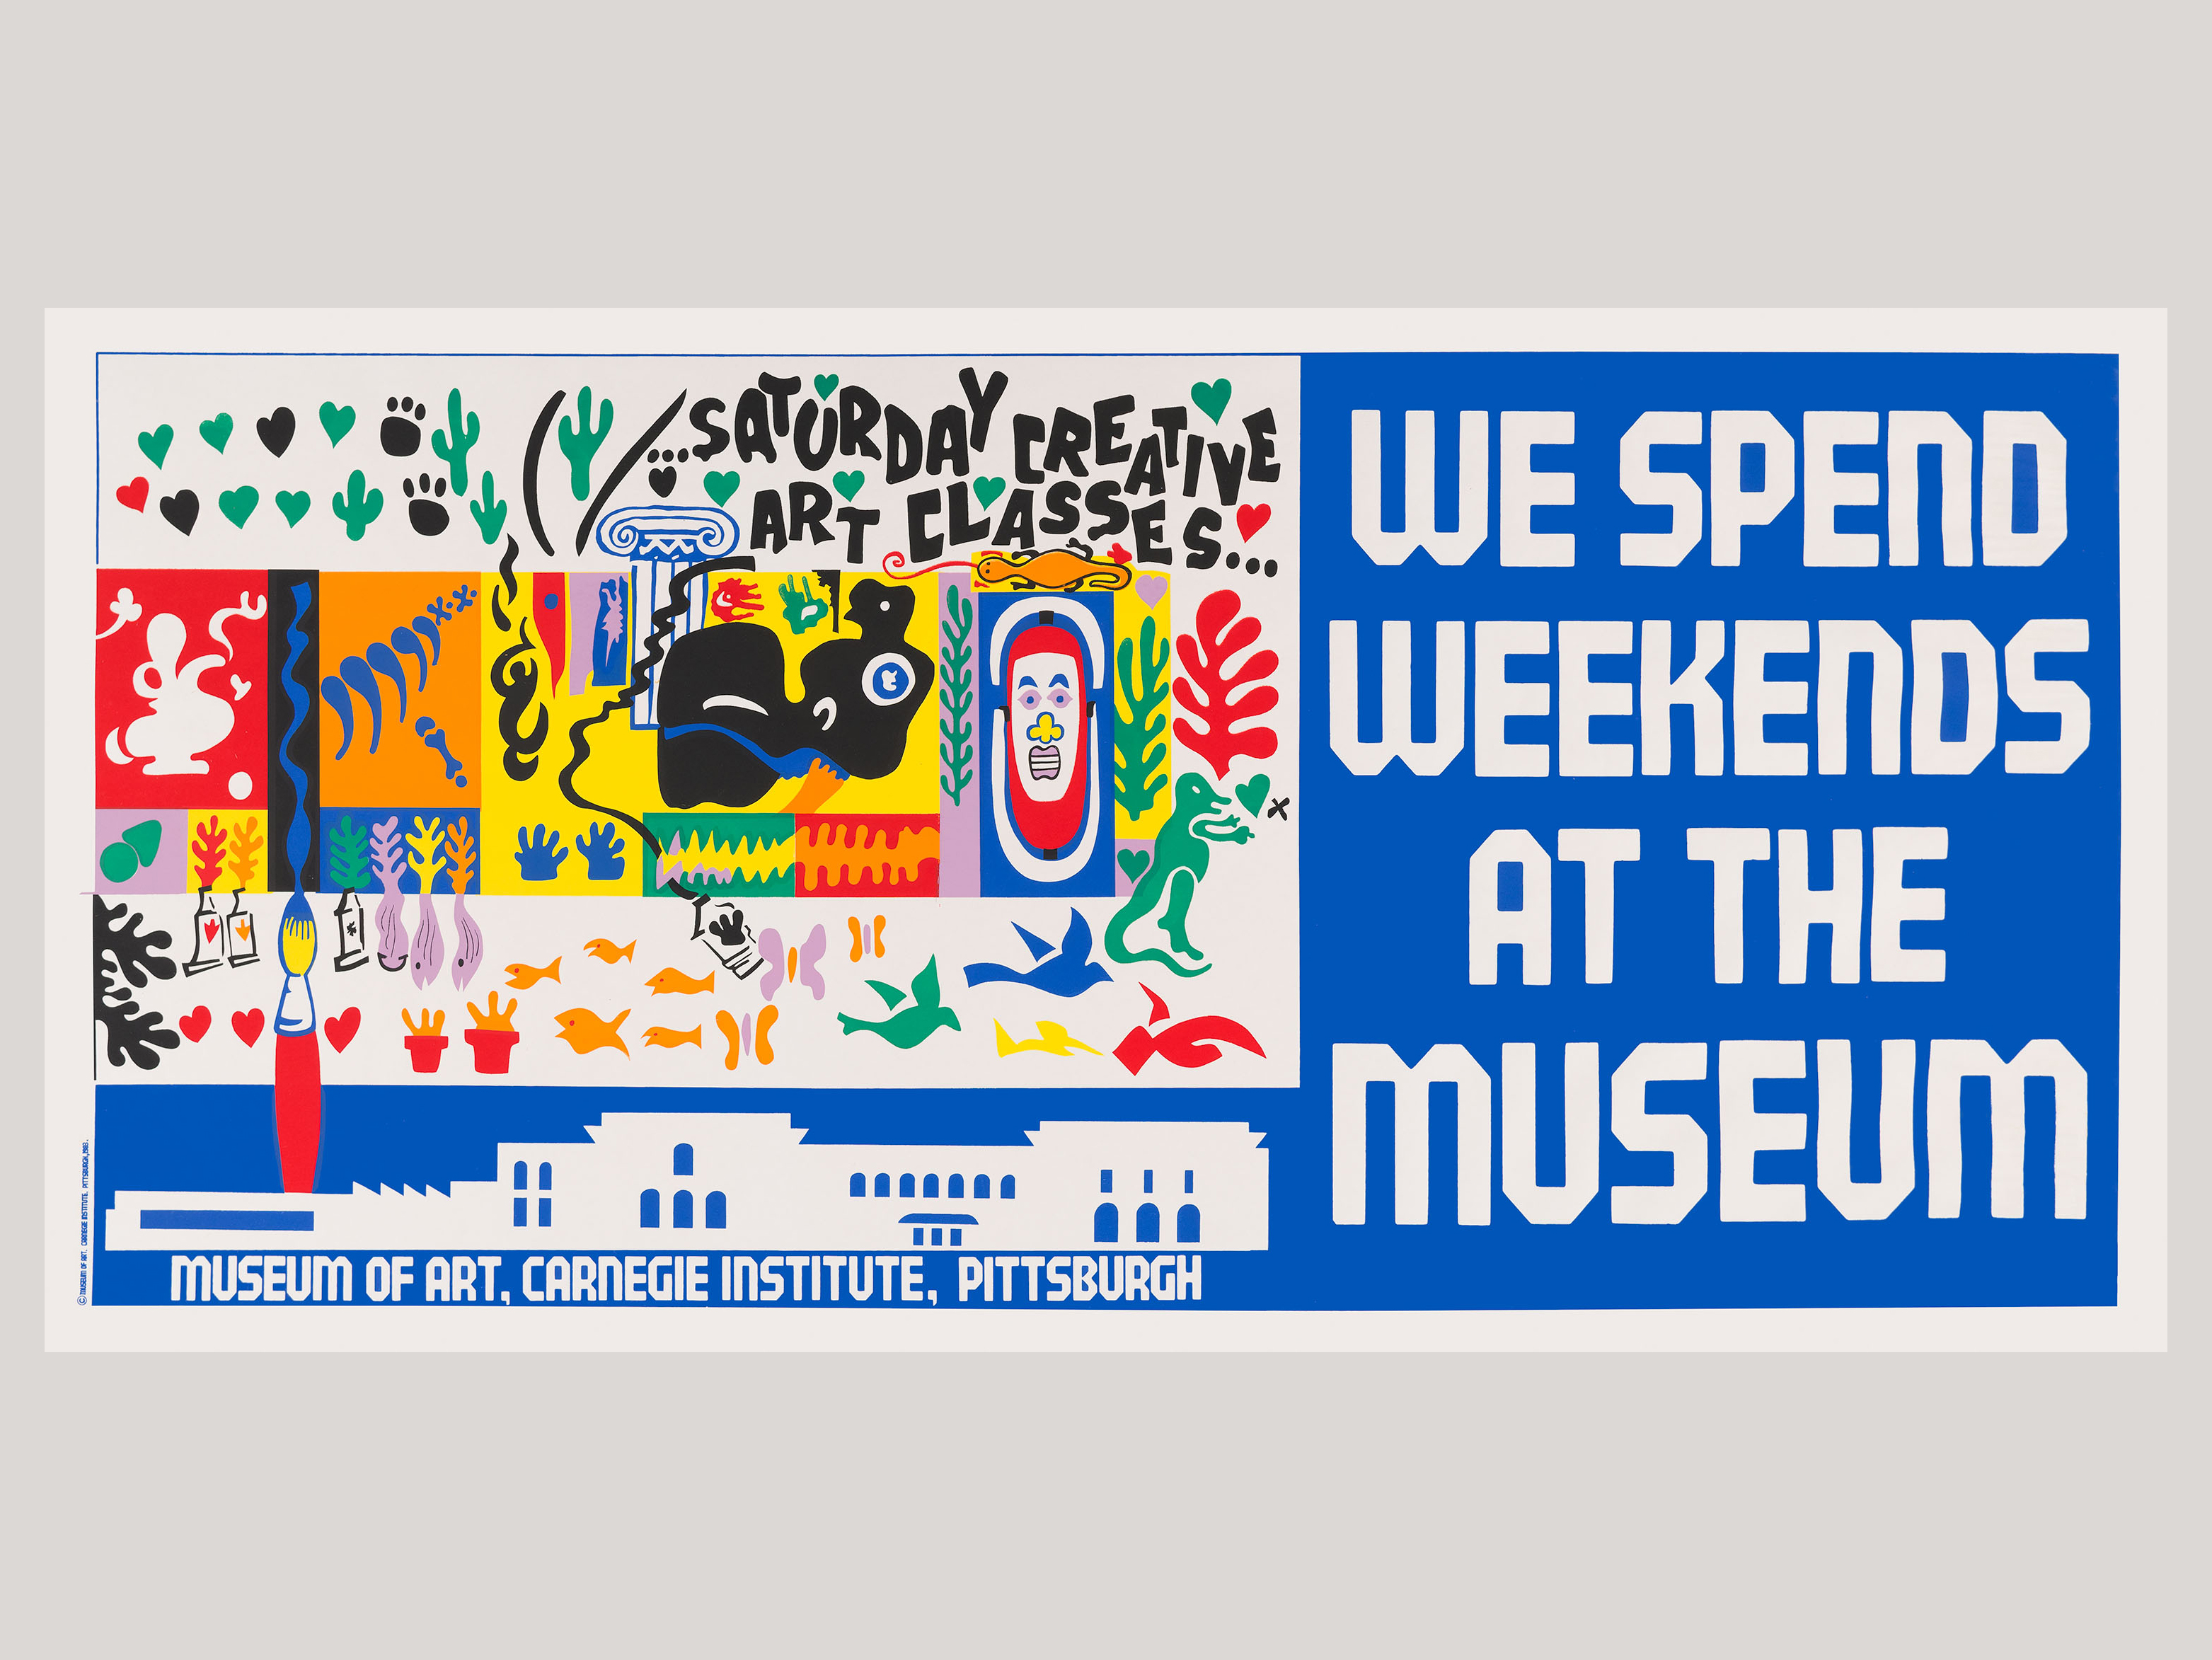 The art connection poster that says: we spend weekends at the museum